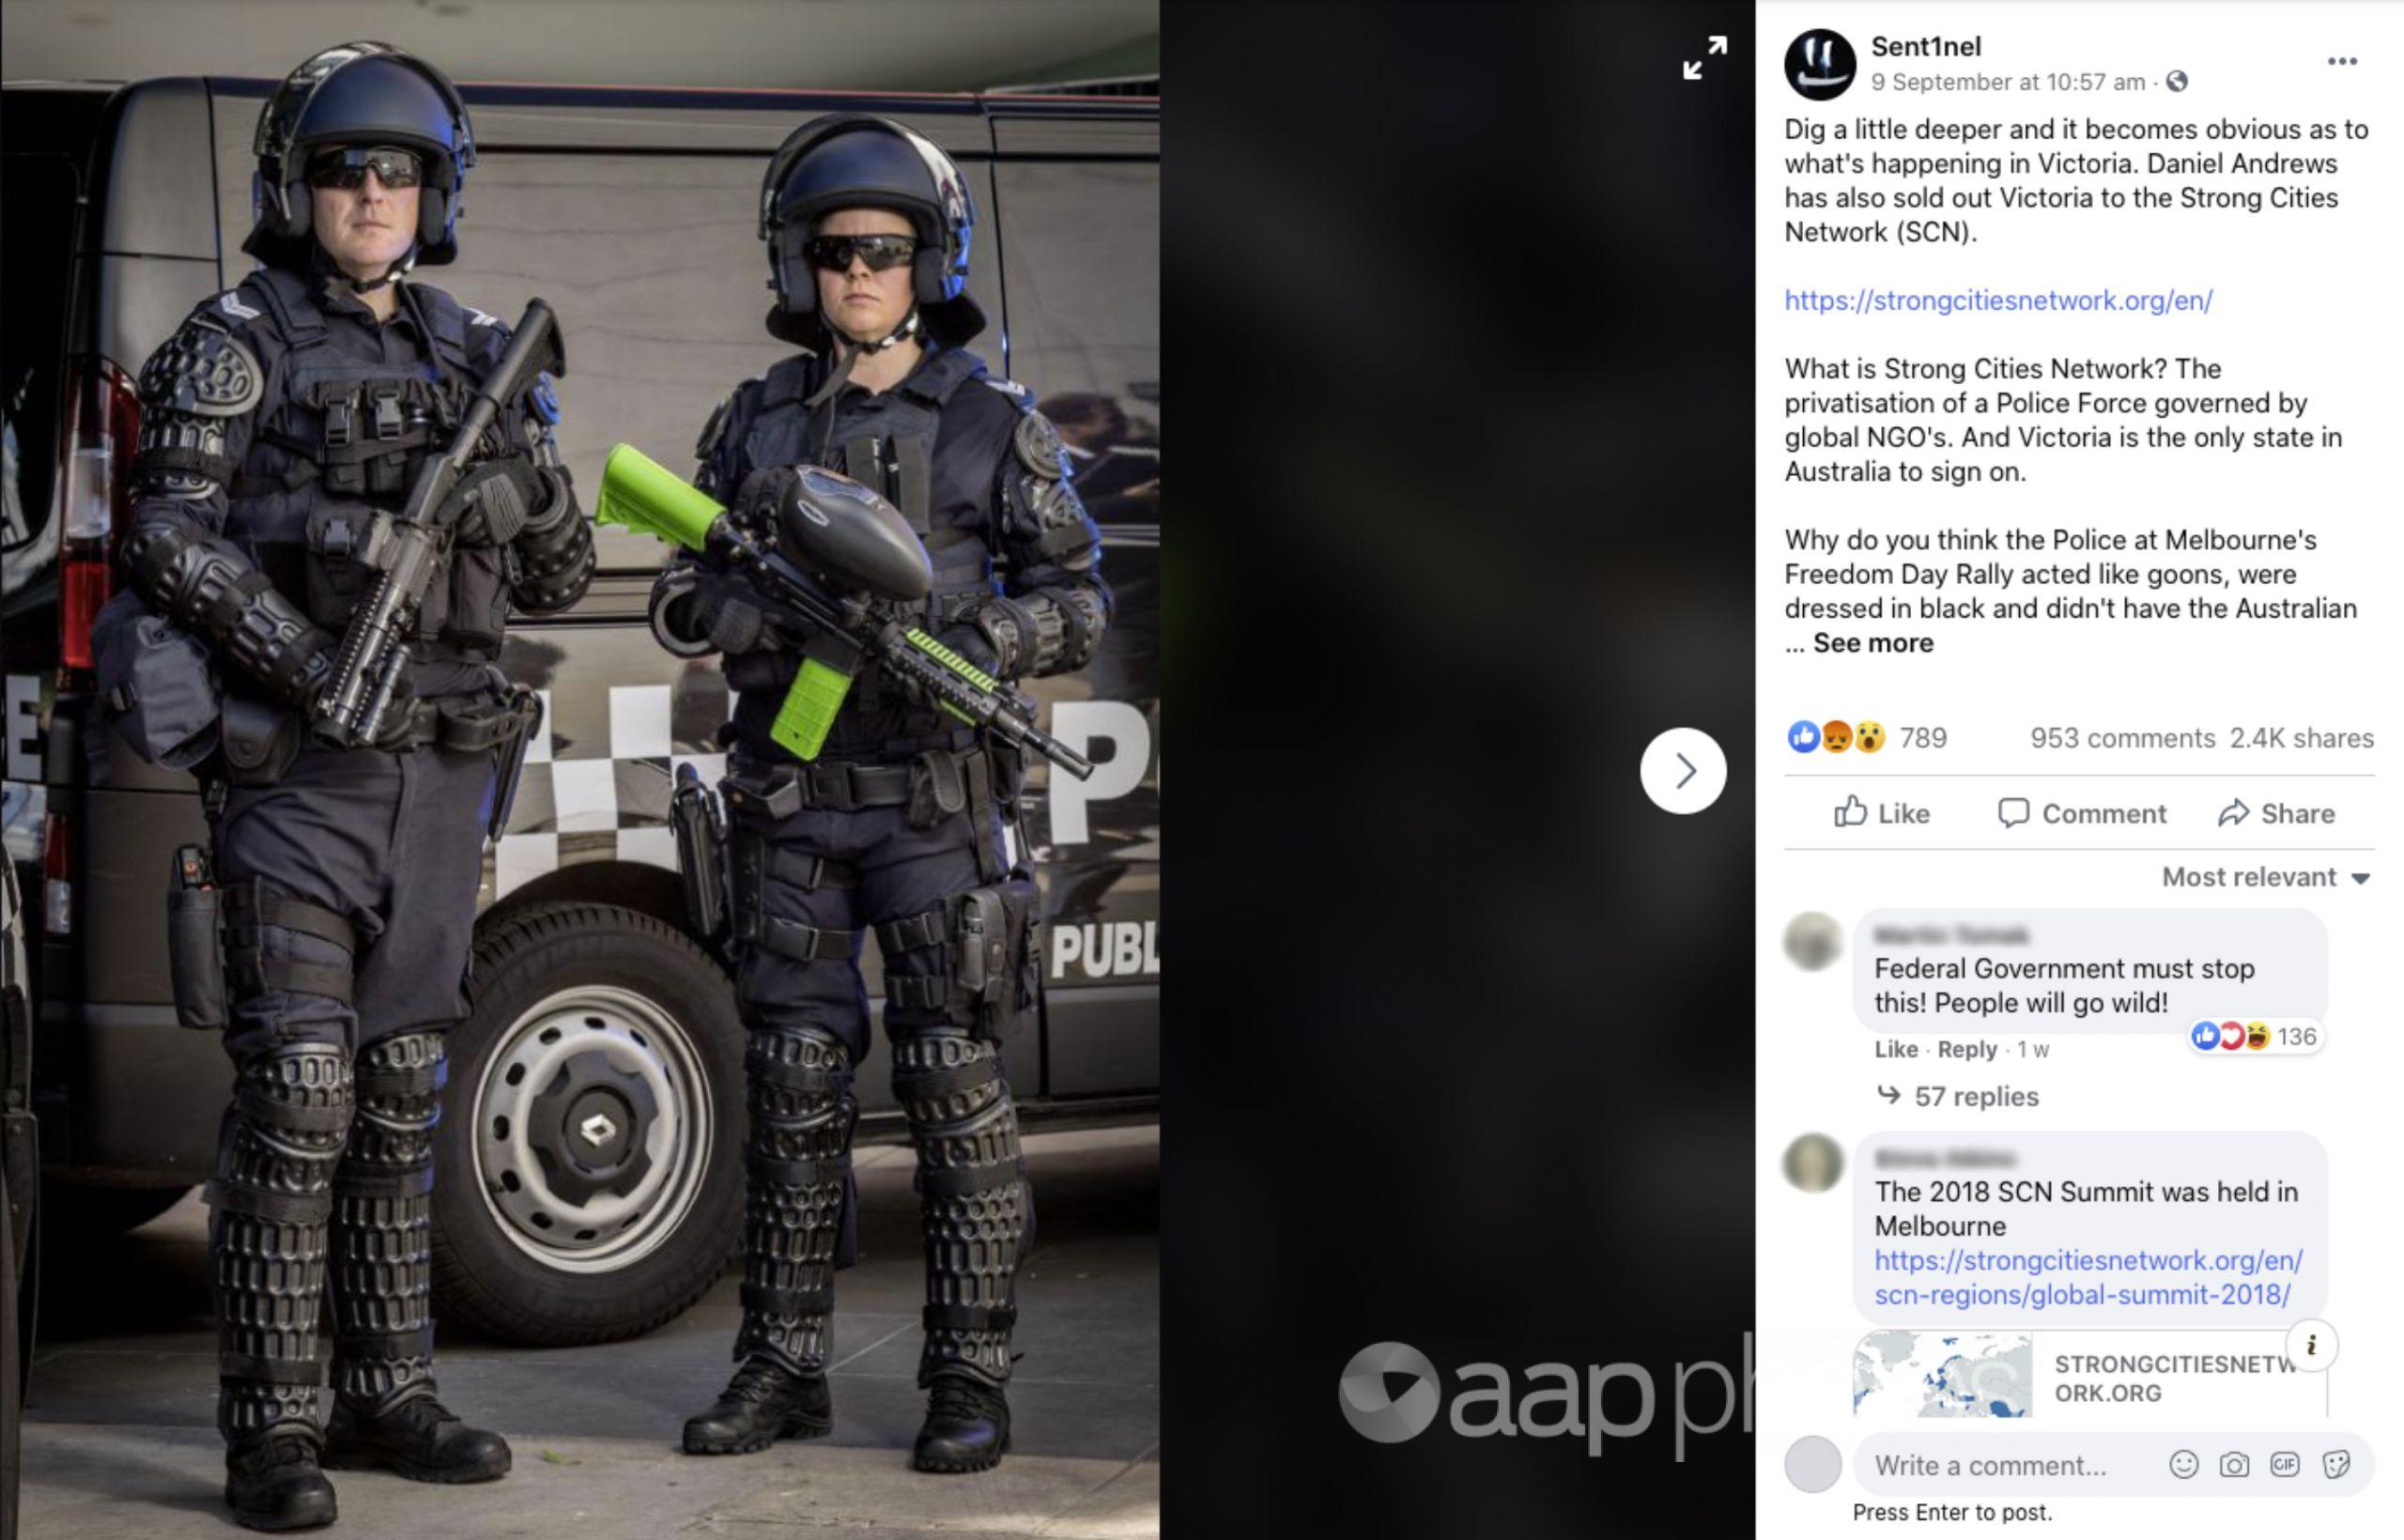 A Facebook post falsely suggesting Victoria Police are privatised